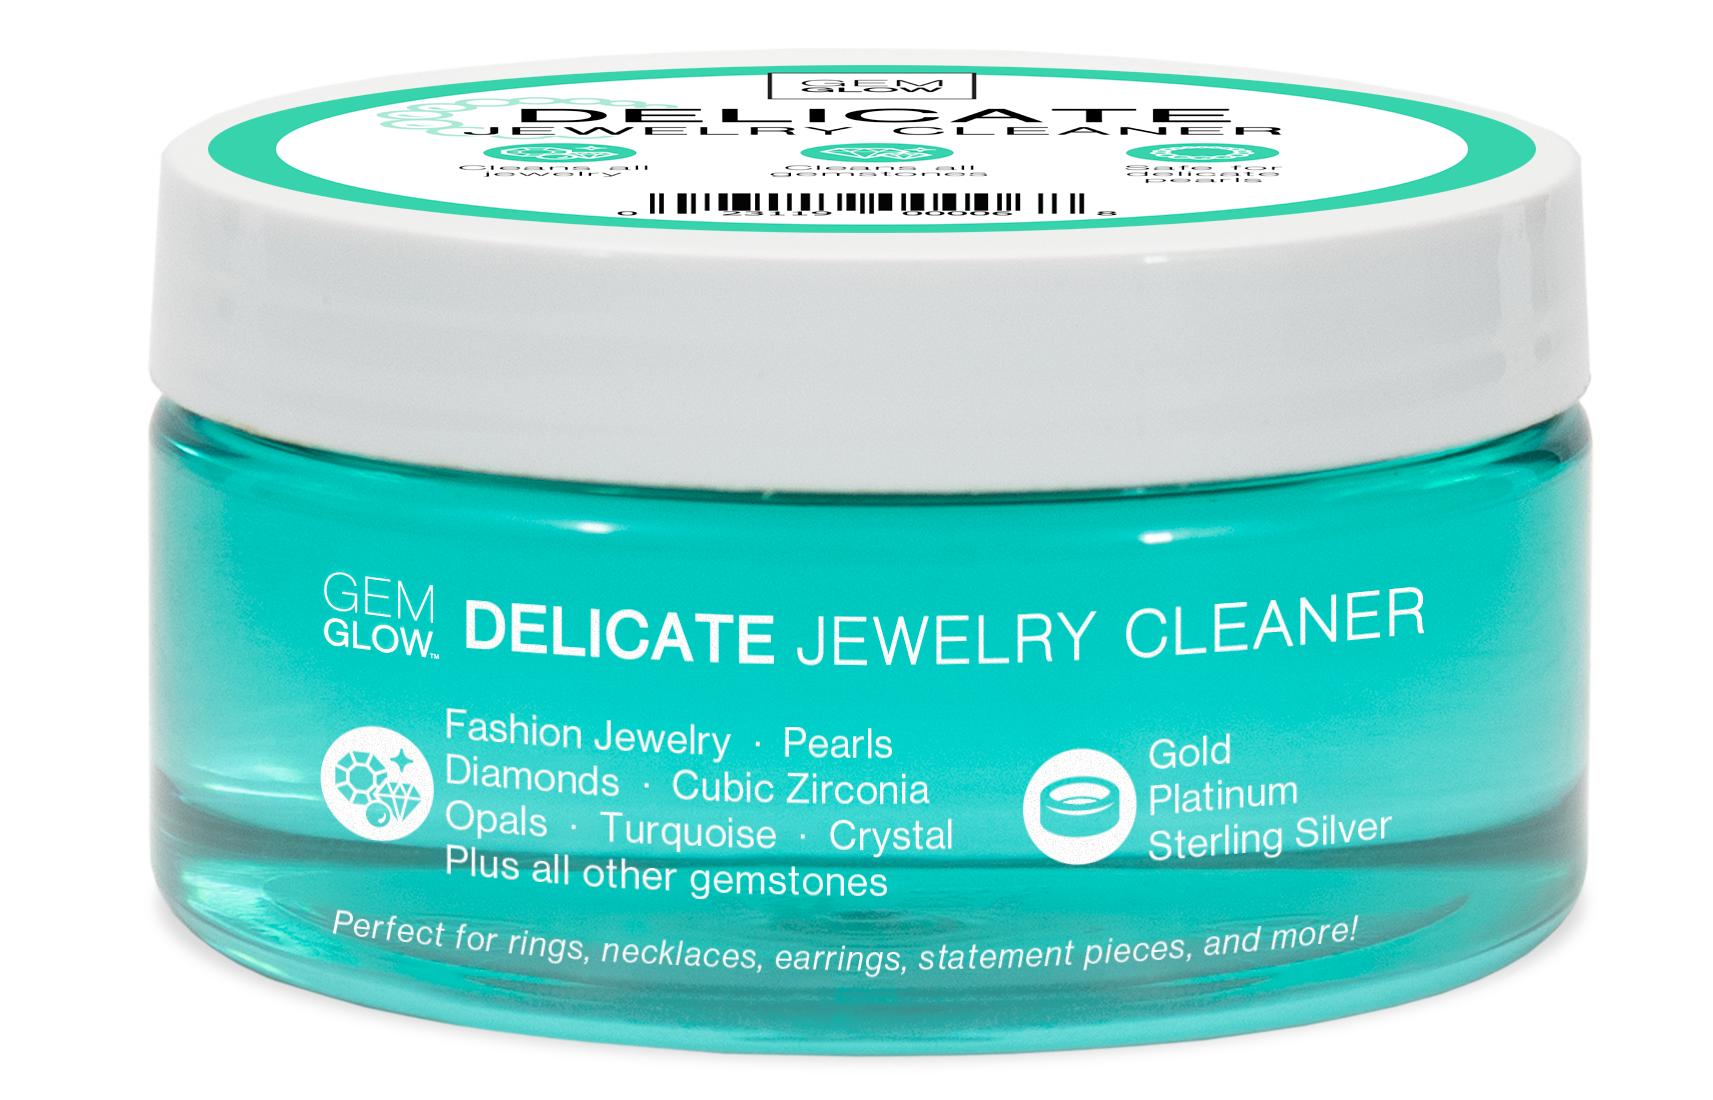 Fashion Jewelry Clean : Costume jewellery cleaner